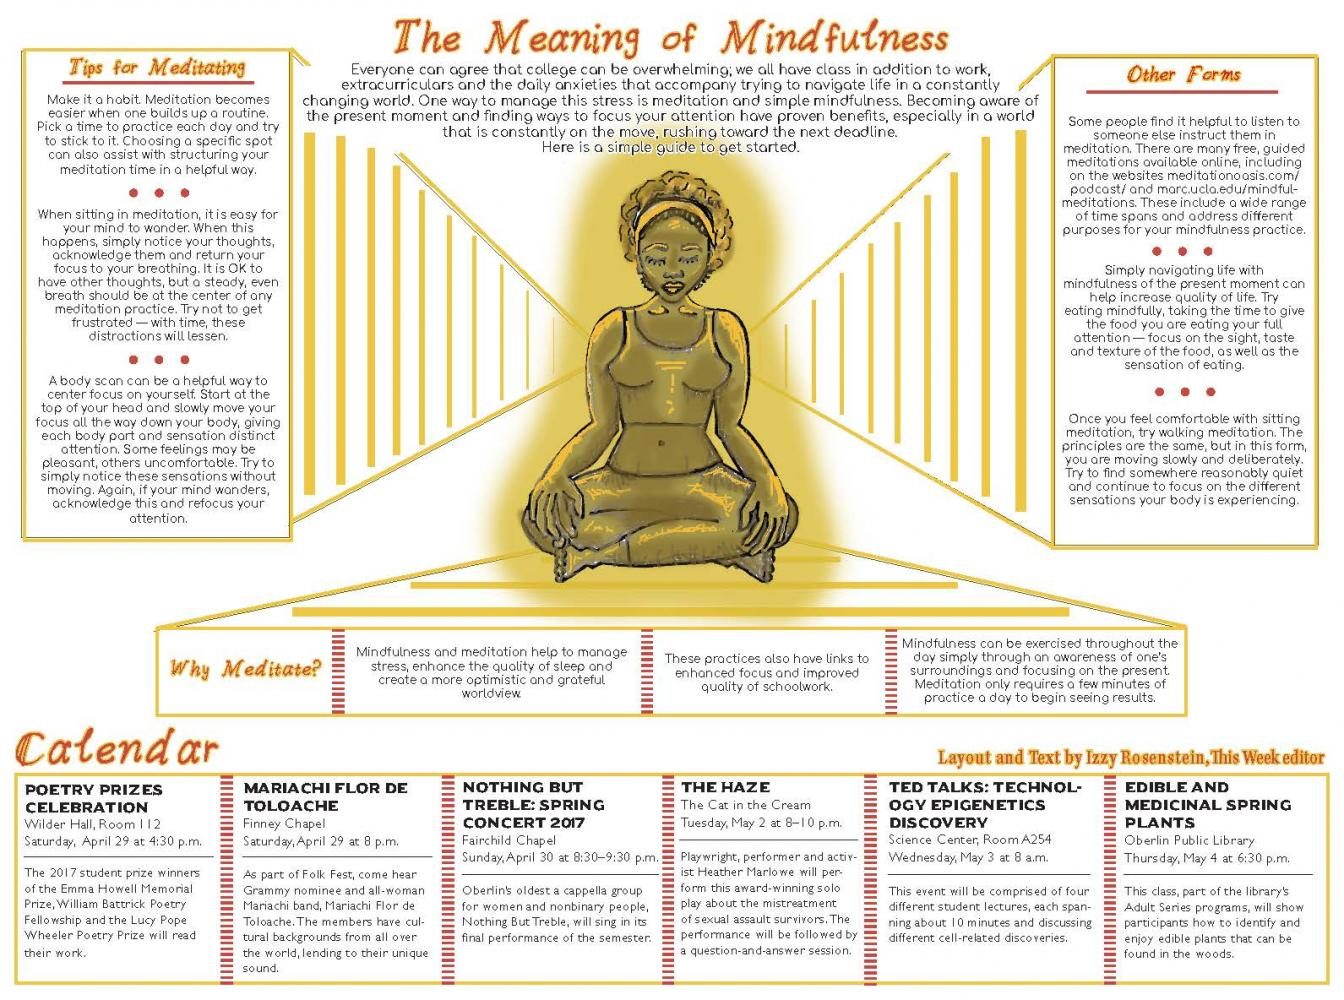 The Meaning of Mindfulness